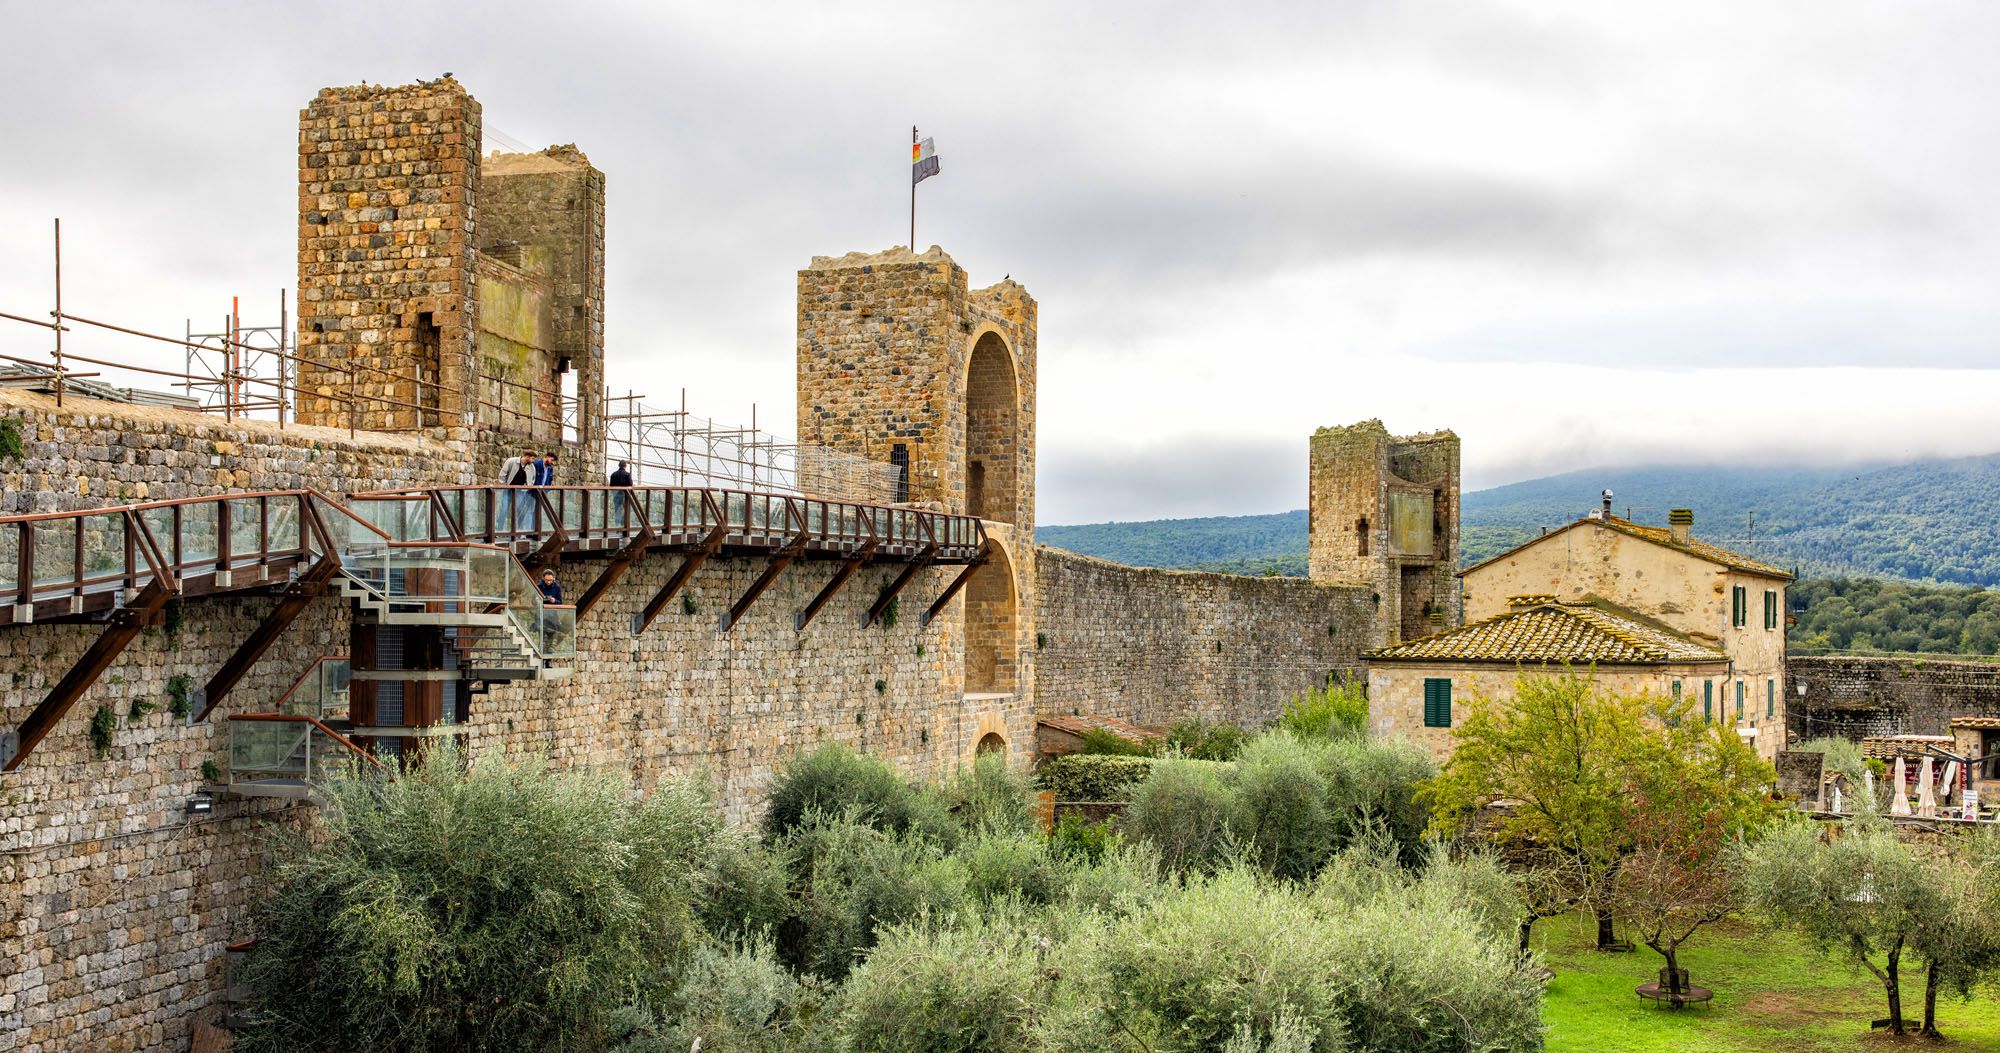 Featured image for “Monteriggioni: Photos, Things to Do, and Helpful Tips”